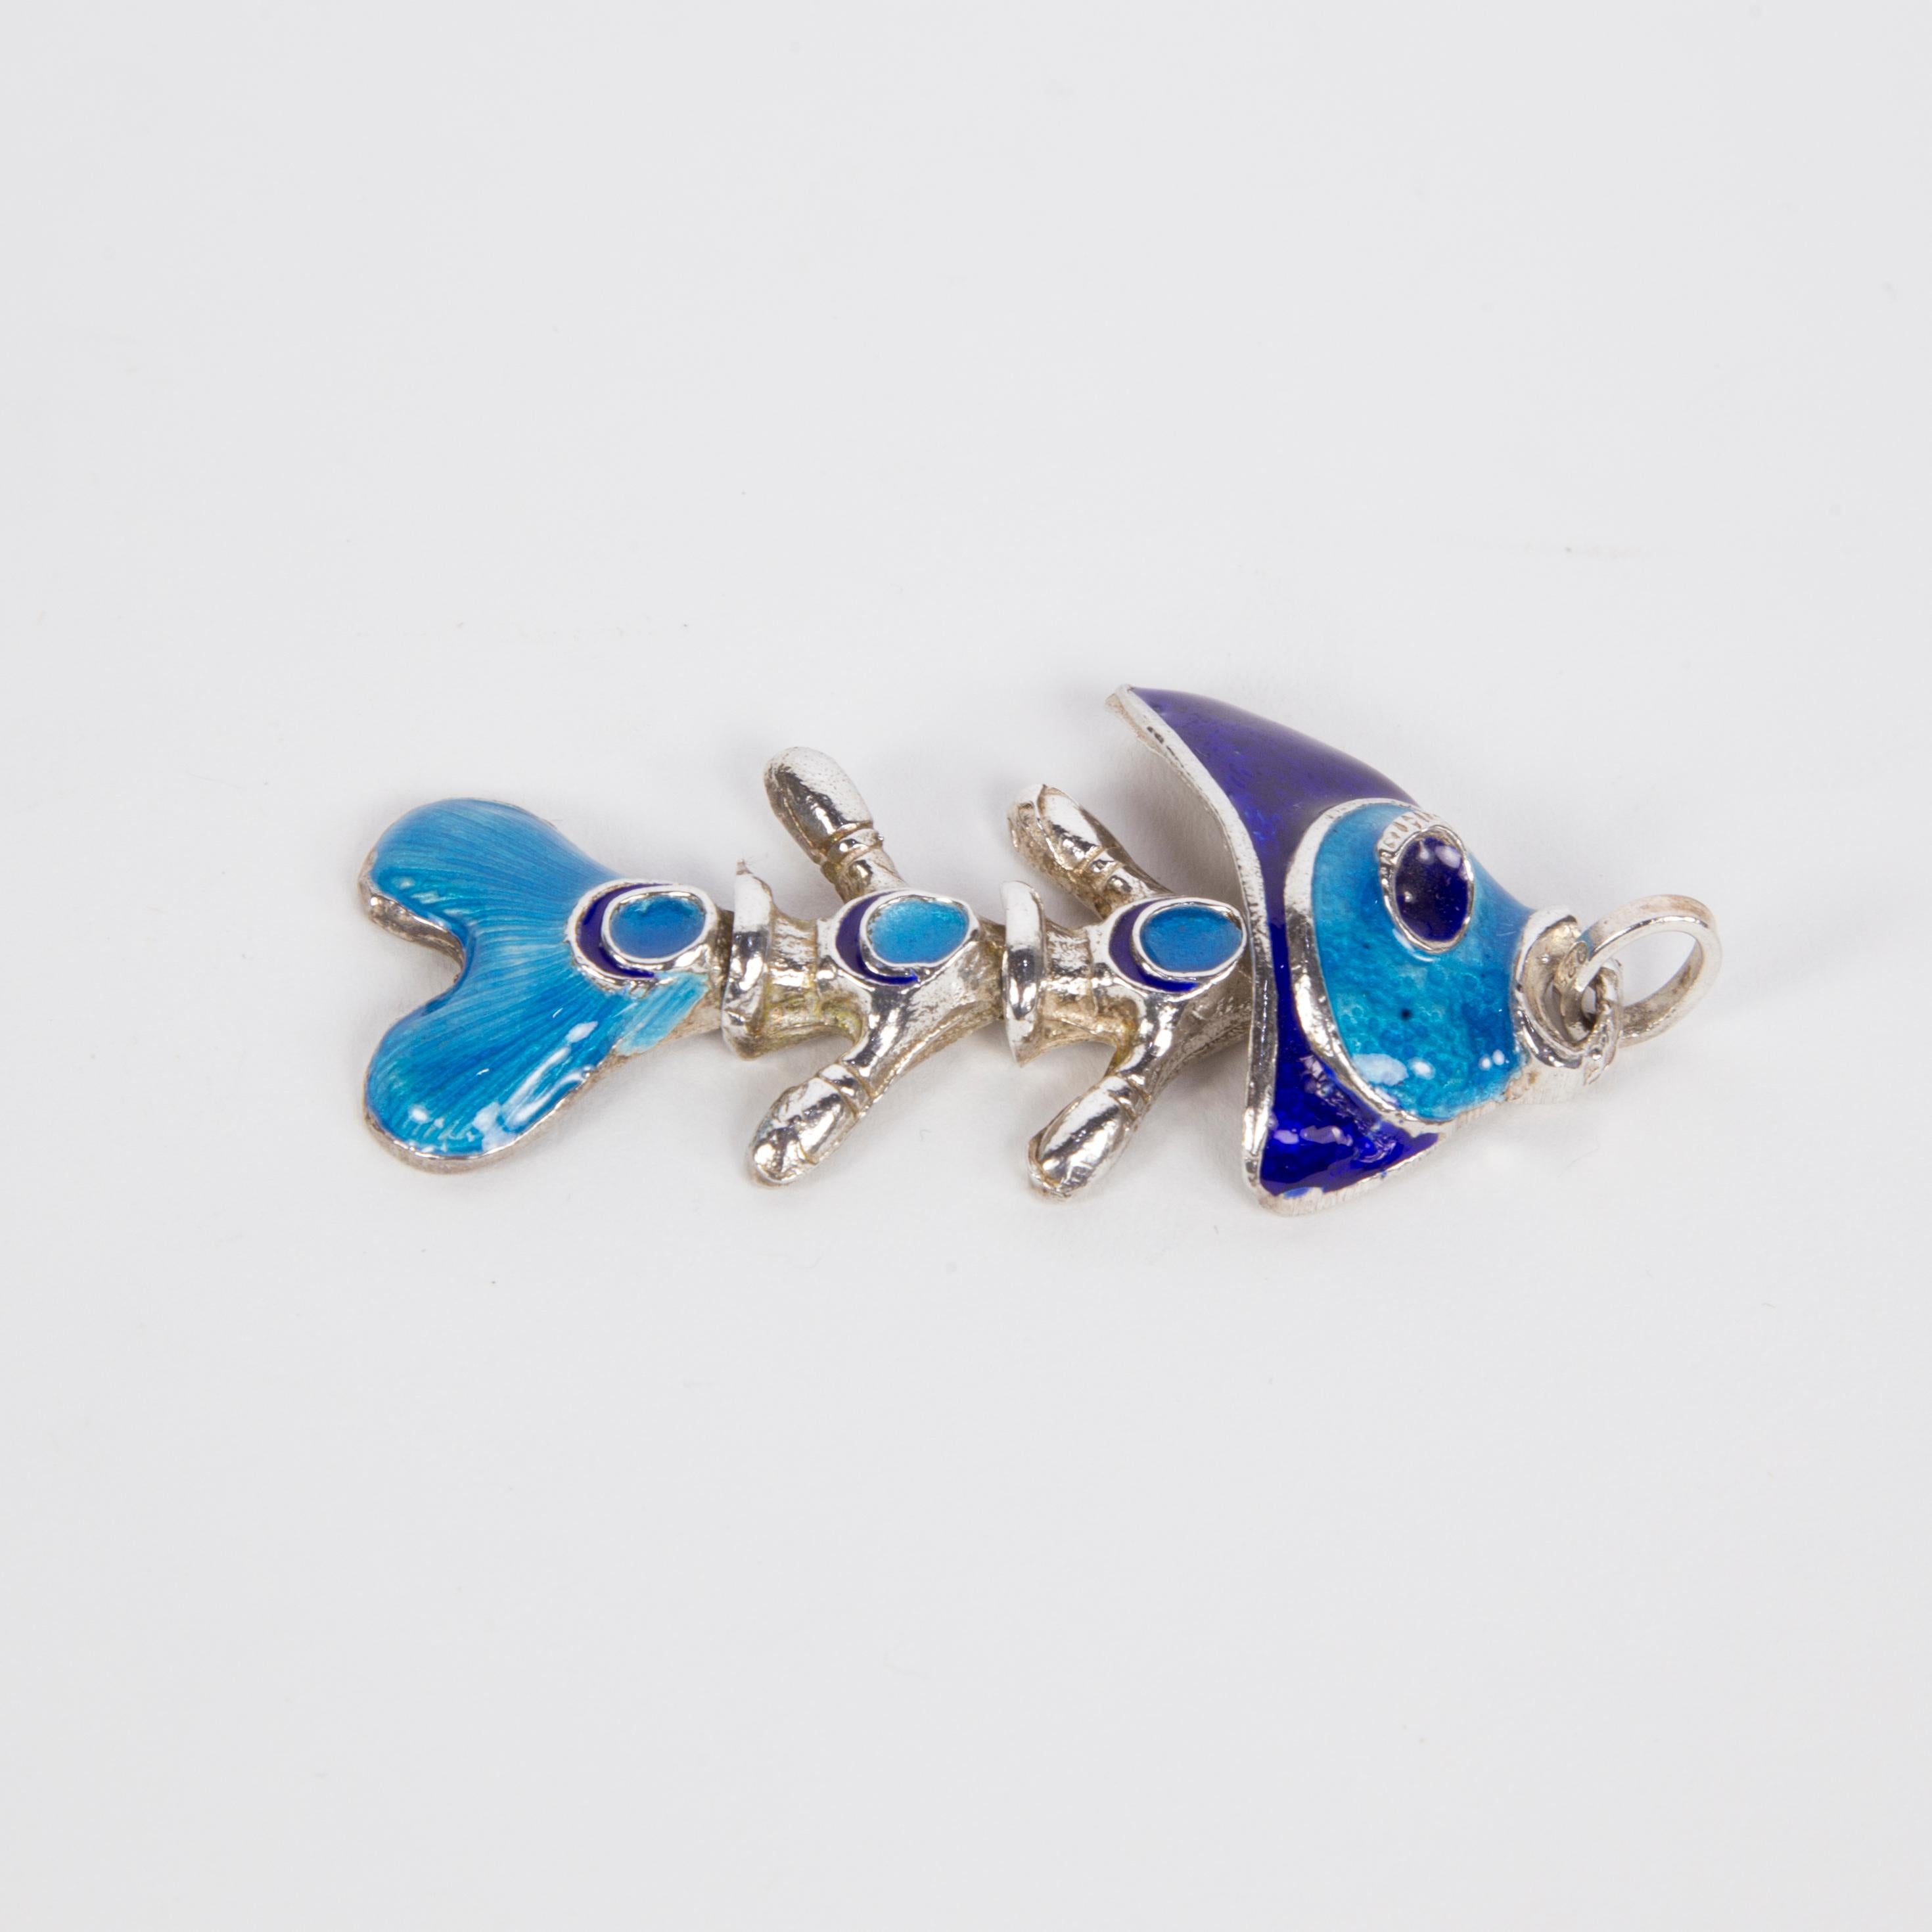 Beautiful Vintage cloisonné enamel articulated Sterling Silver Fish pendant; striking colors of turquoise blue and navy blue; measuring approx. 2.50” long including bale. Add an alluring touch to any ensemble with this beautiful necklace! 